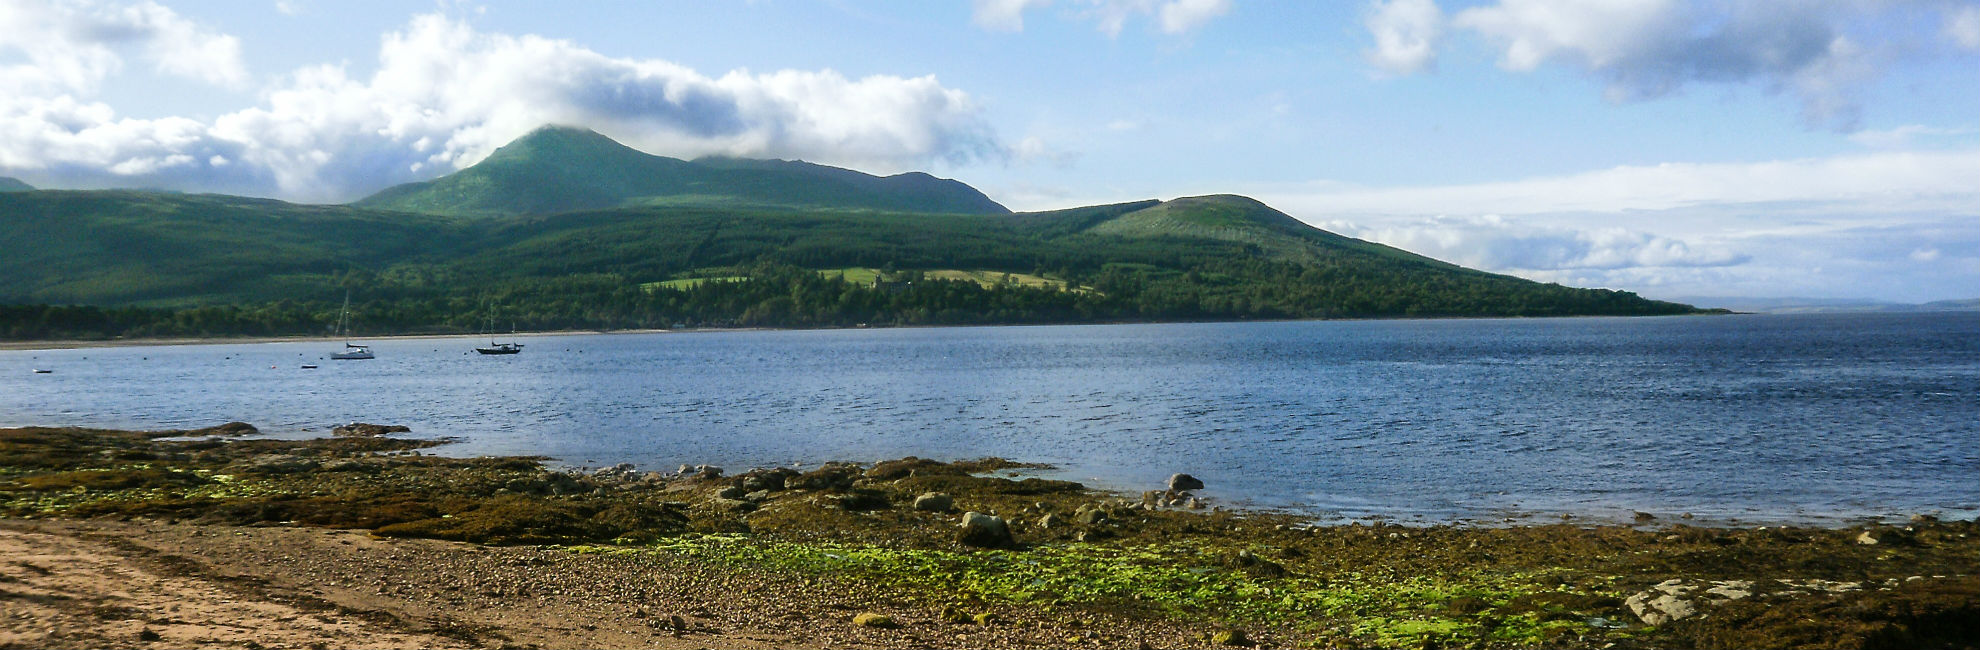 A peaceful bay surrounded by green mountains and hillside on the Isle of Arran in Scotland